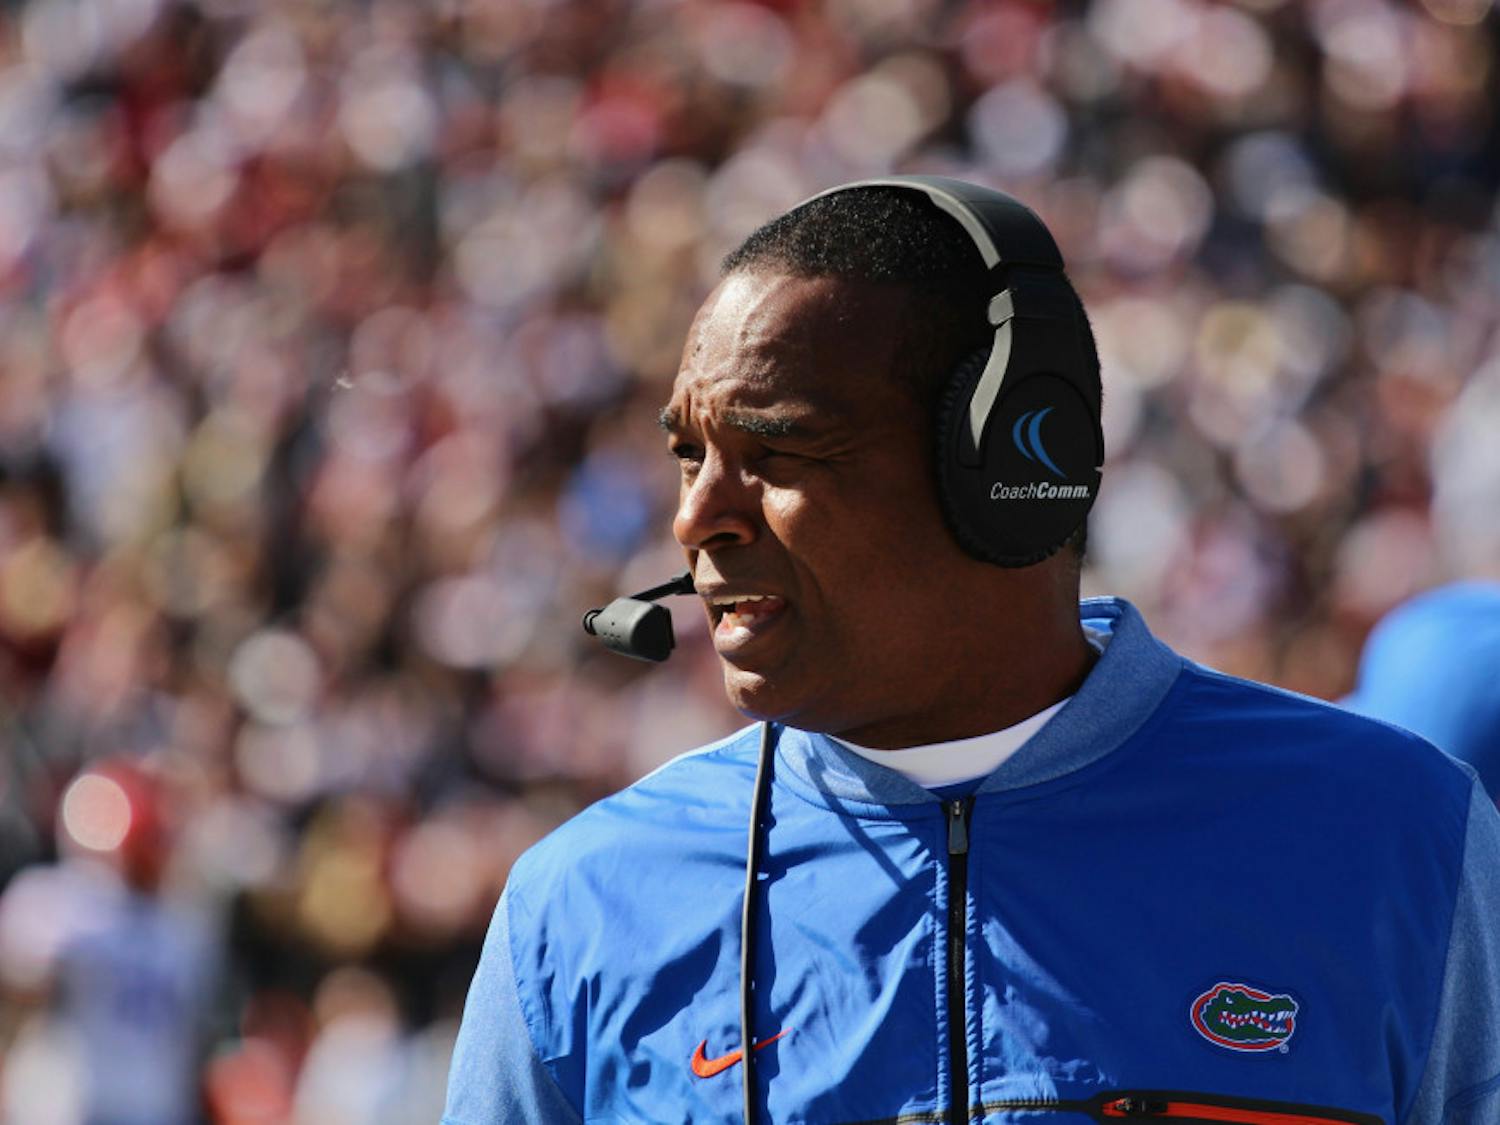 Even though UF interim coach Randy Shannon went 28-22 at Miami as the head coach before being fired, many of Florida's players have expressed interest in having Shannon take over as the Gators' coach. “We play our best for (him),” linebacker David Reese said.